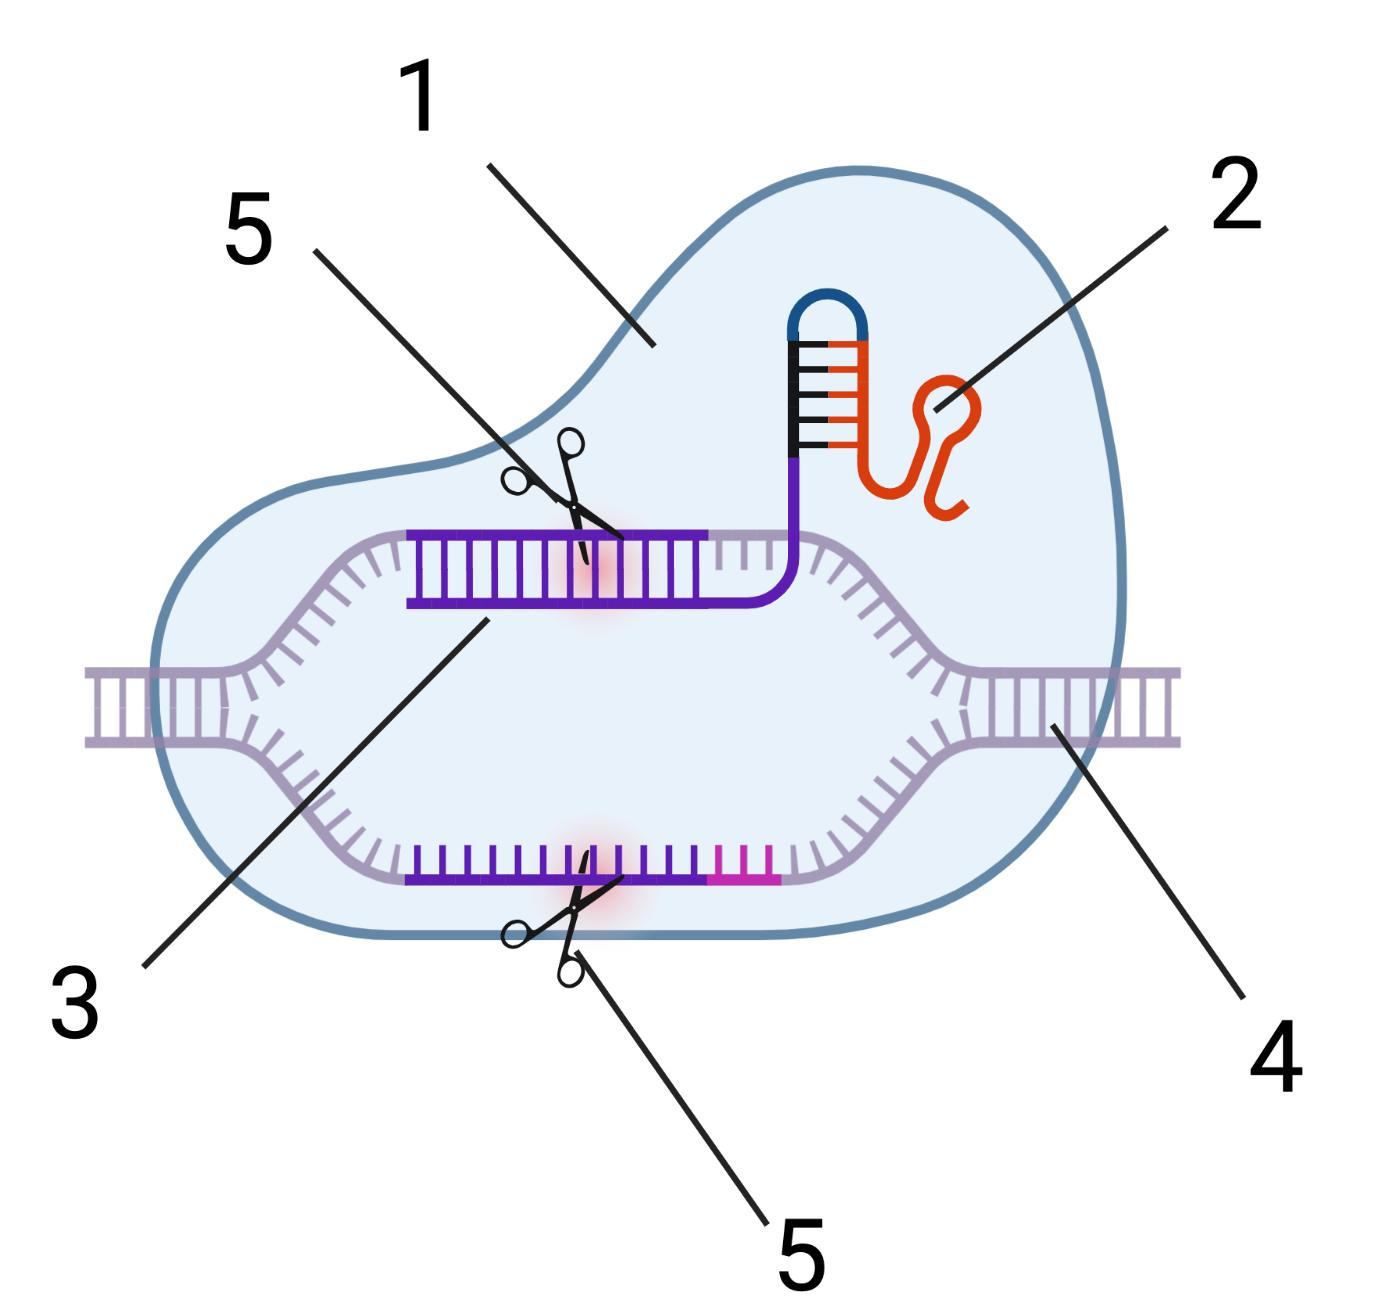 1. Cas9 protein. 2. Structural RNA. 3. Viral DNA. 4. Targeting RNA. 5. Enzyme scissors.